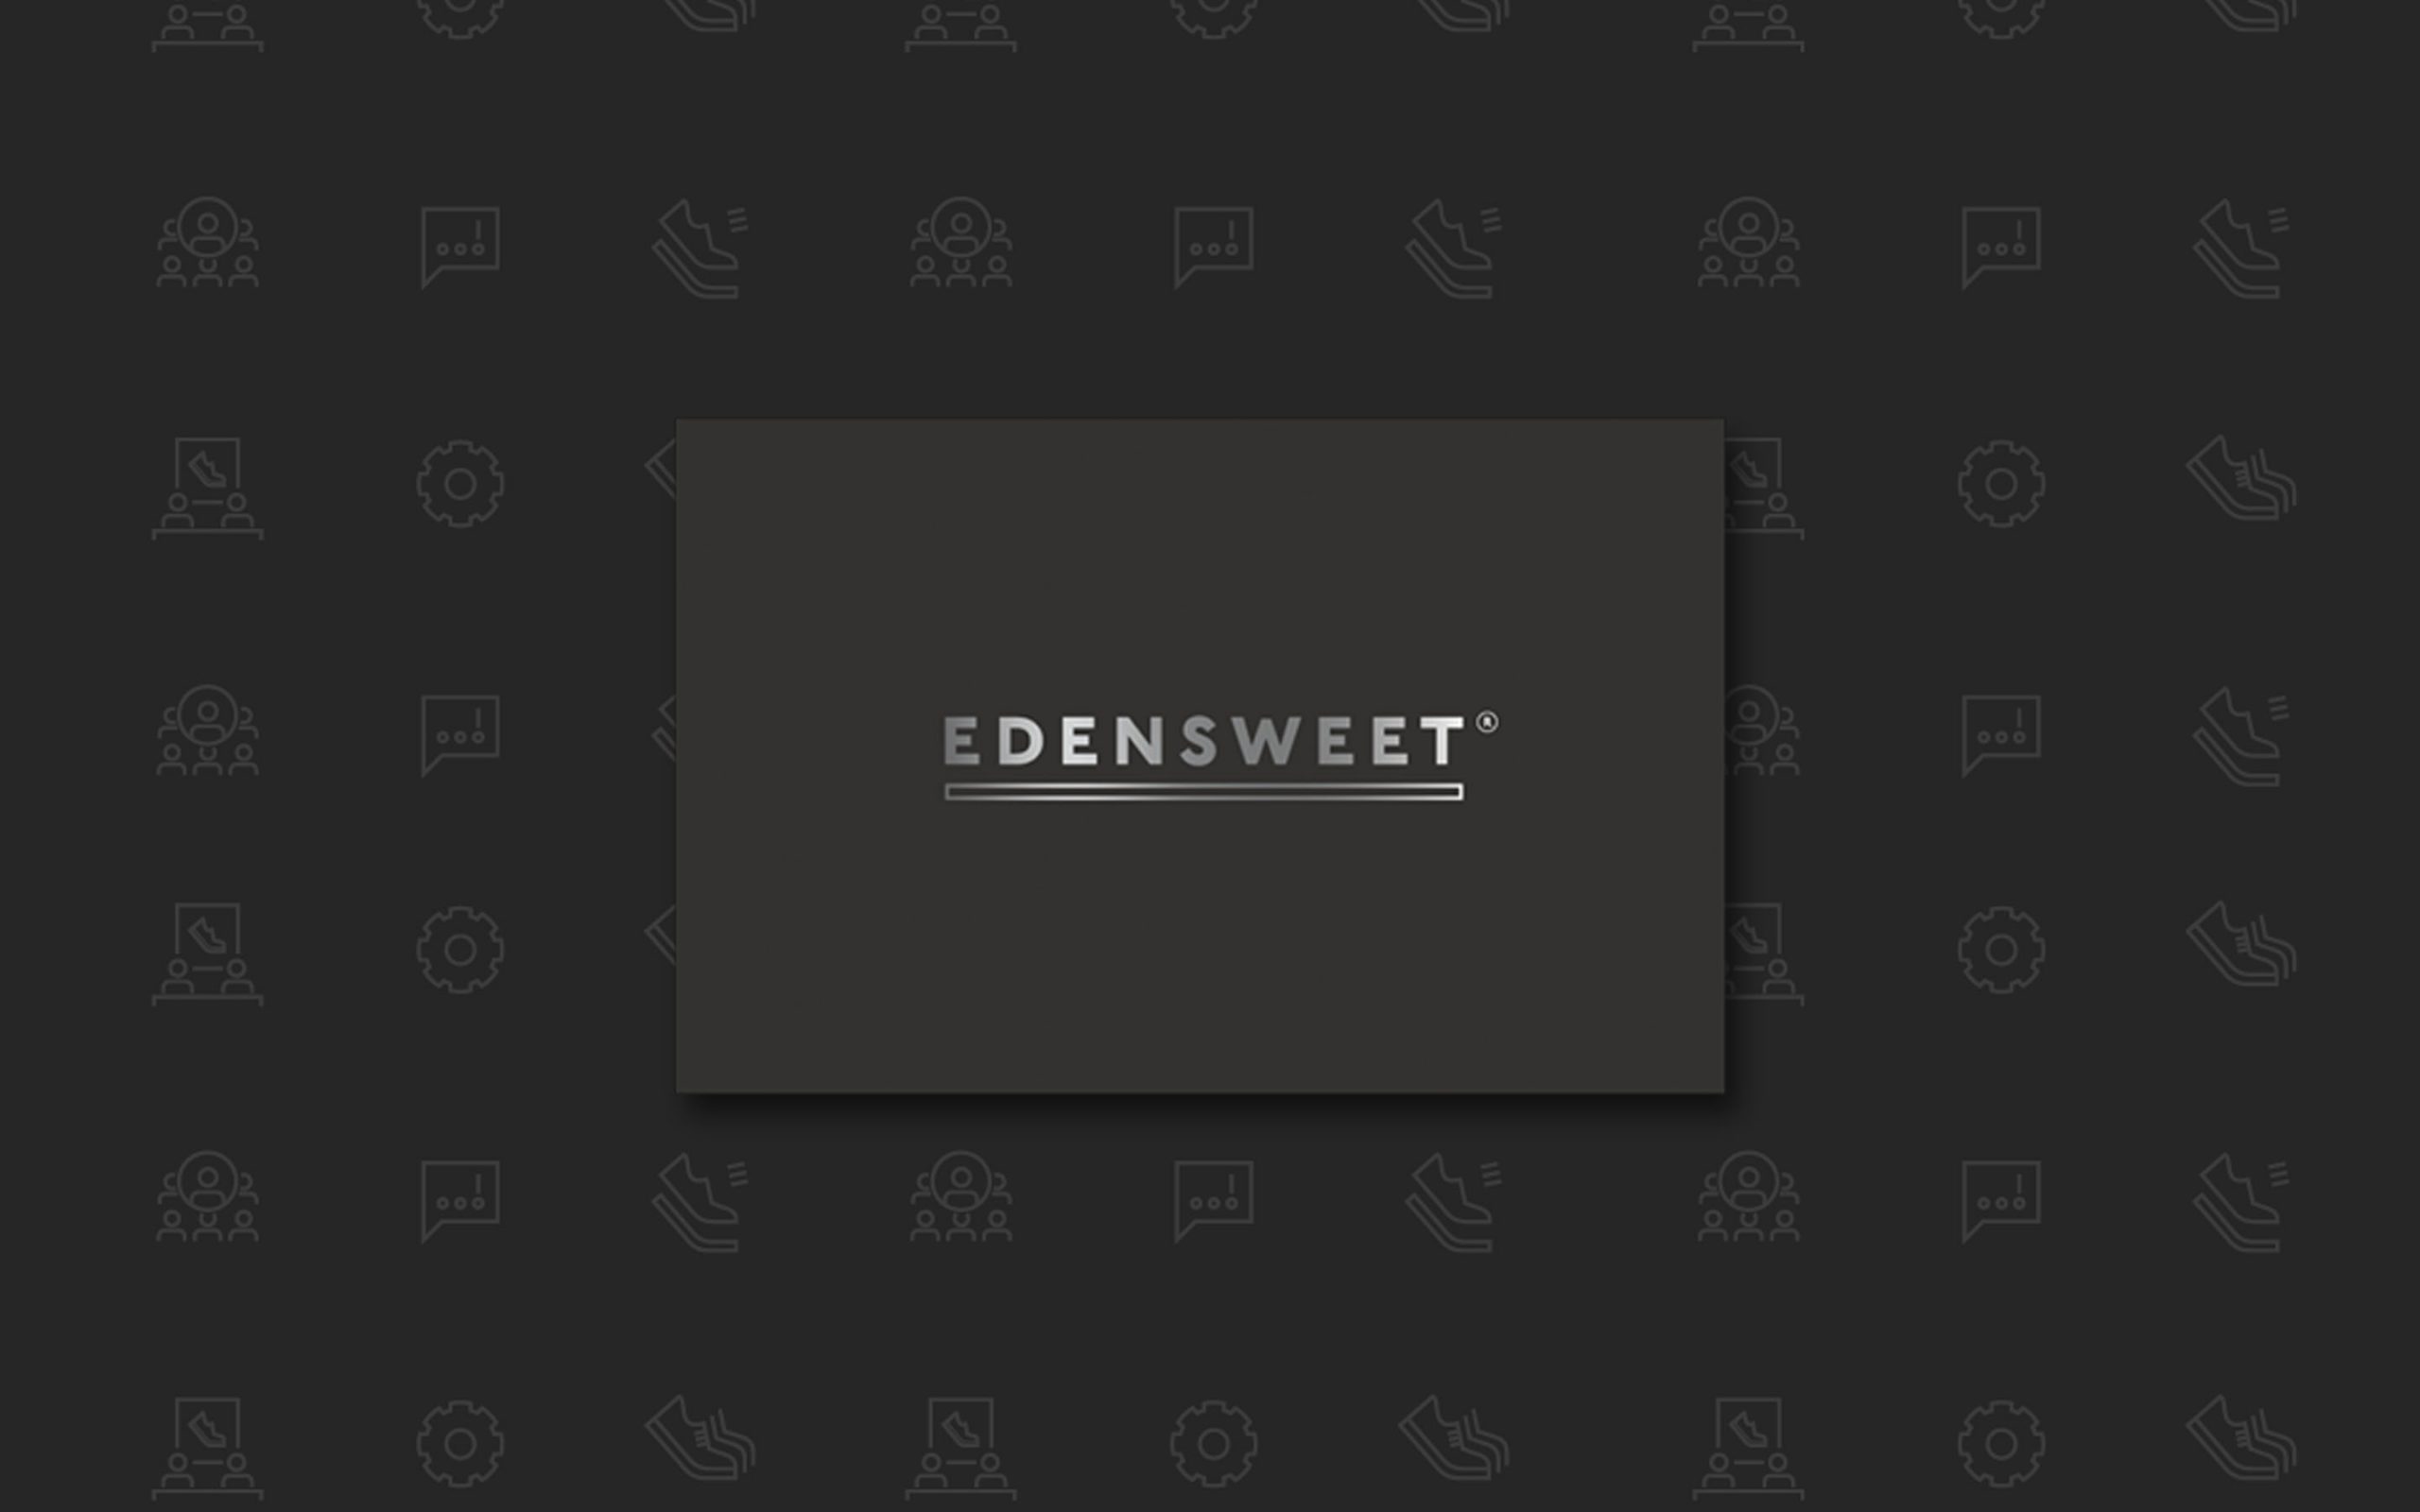 Edensweet Cover